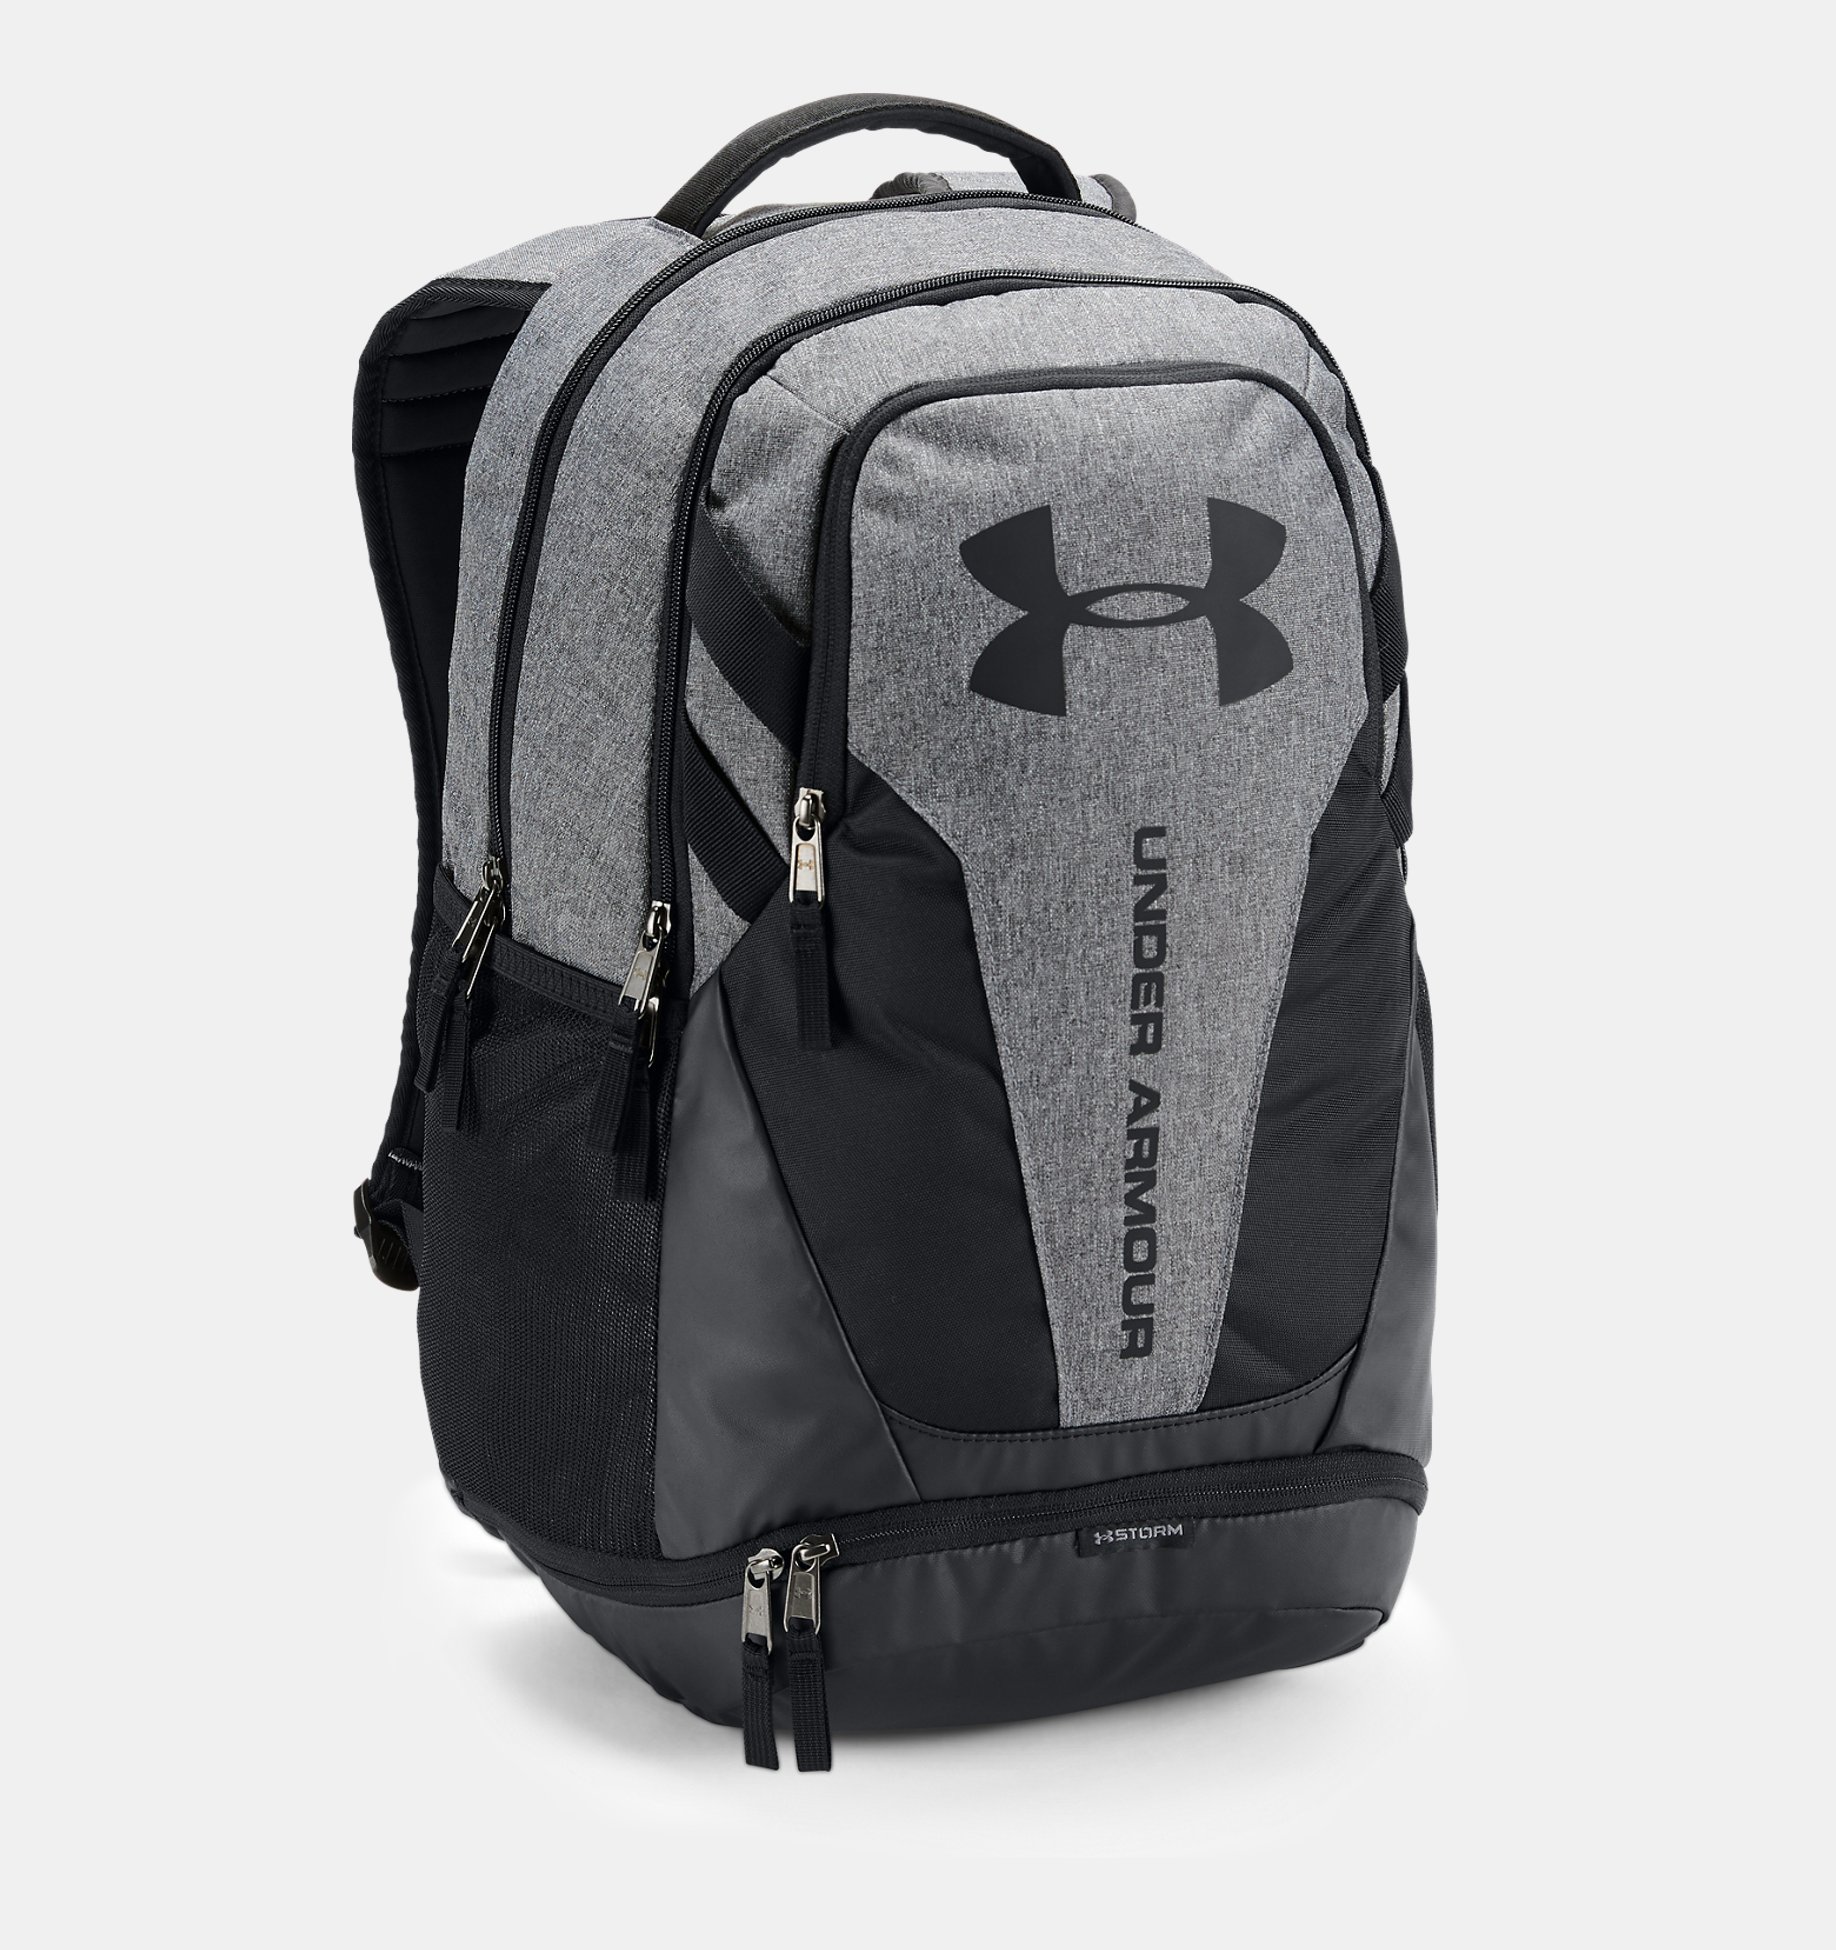 2019 HOT With Tags Under Armour Hustle UA Storm 3.0 Backpack Laptop School Bag 